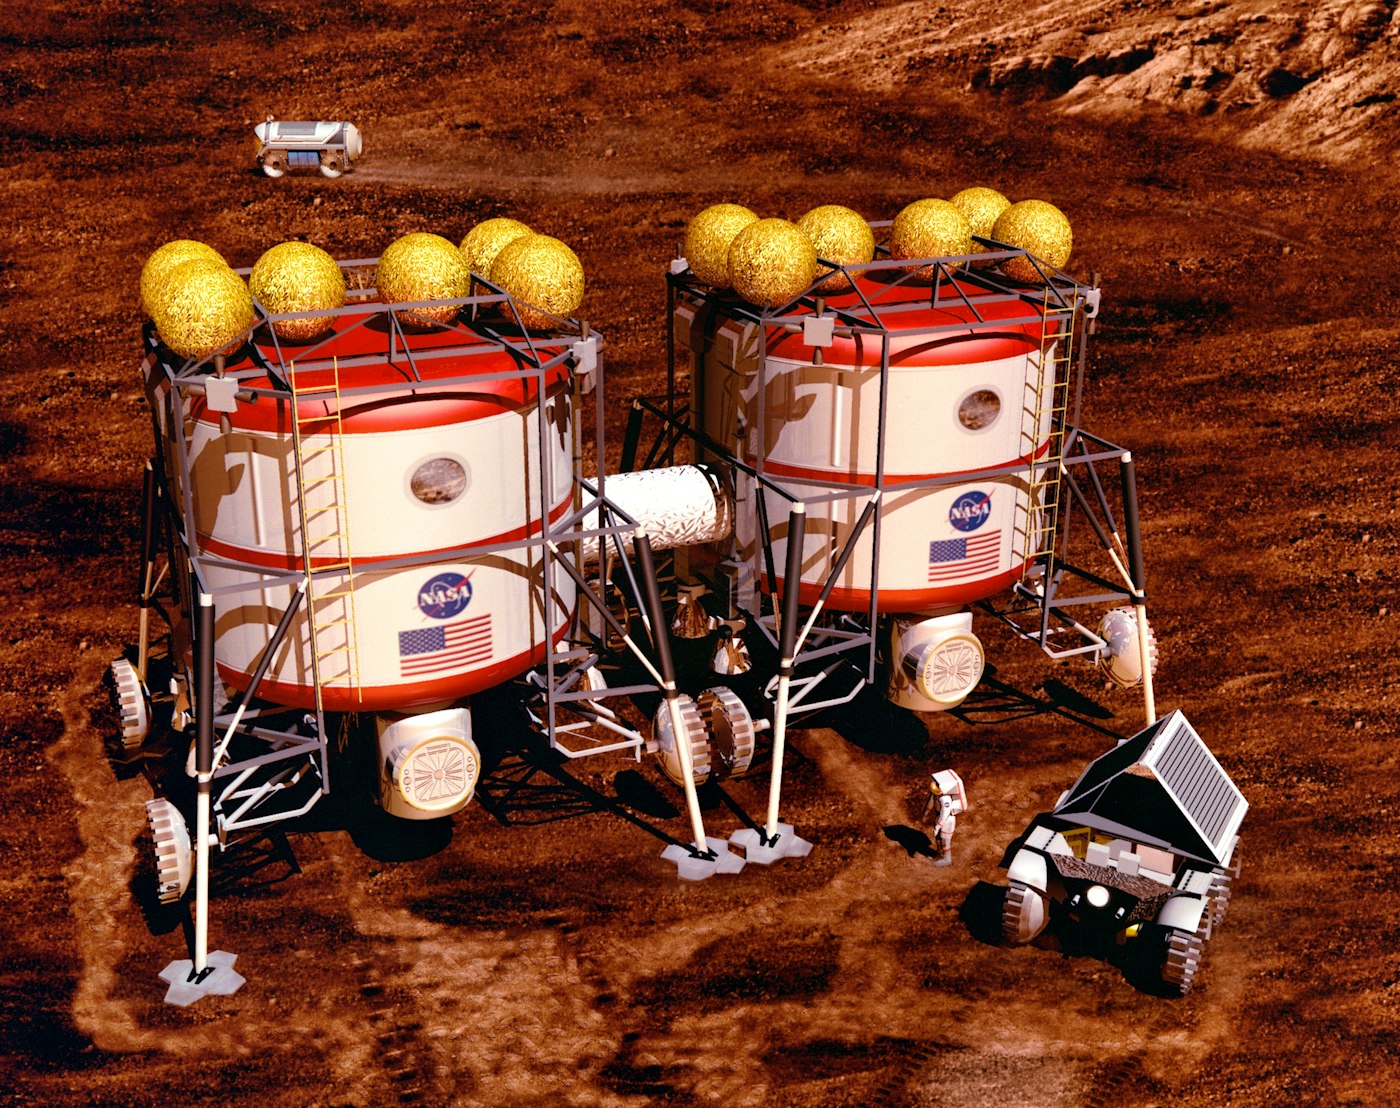 Artist's rendering of Mars Semi-Direct/DRA 1.0: The Manned Habitat Unit is “docked” alongside a pre placed habitat that was sent ahead of the Earth Return Vehicle.